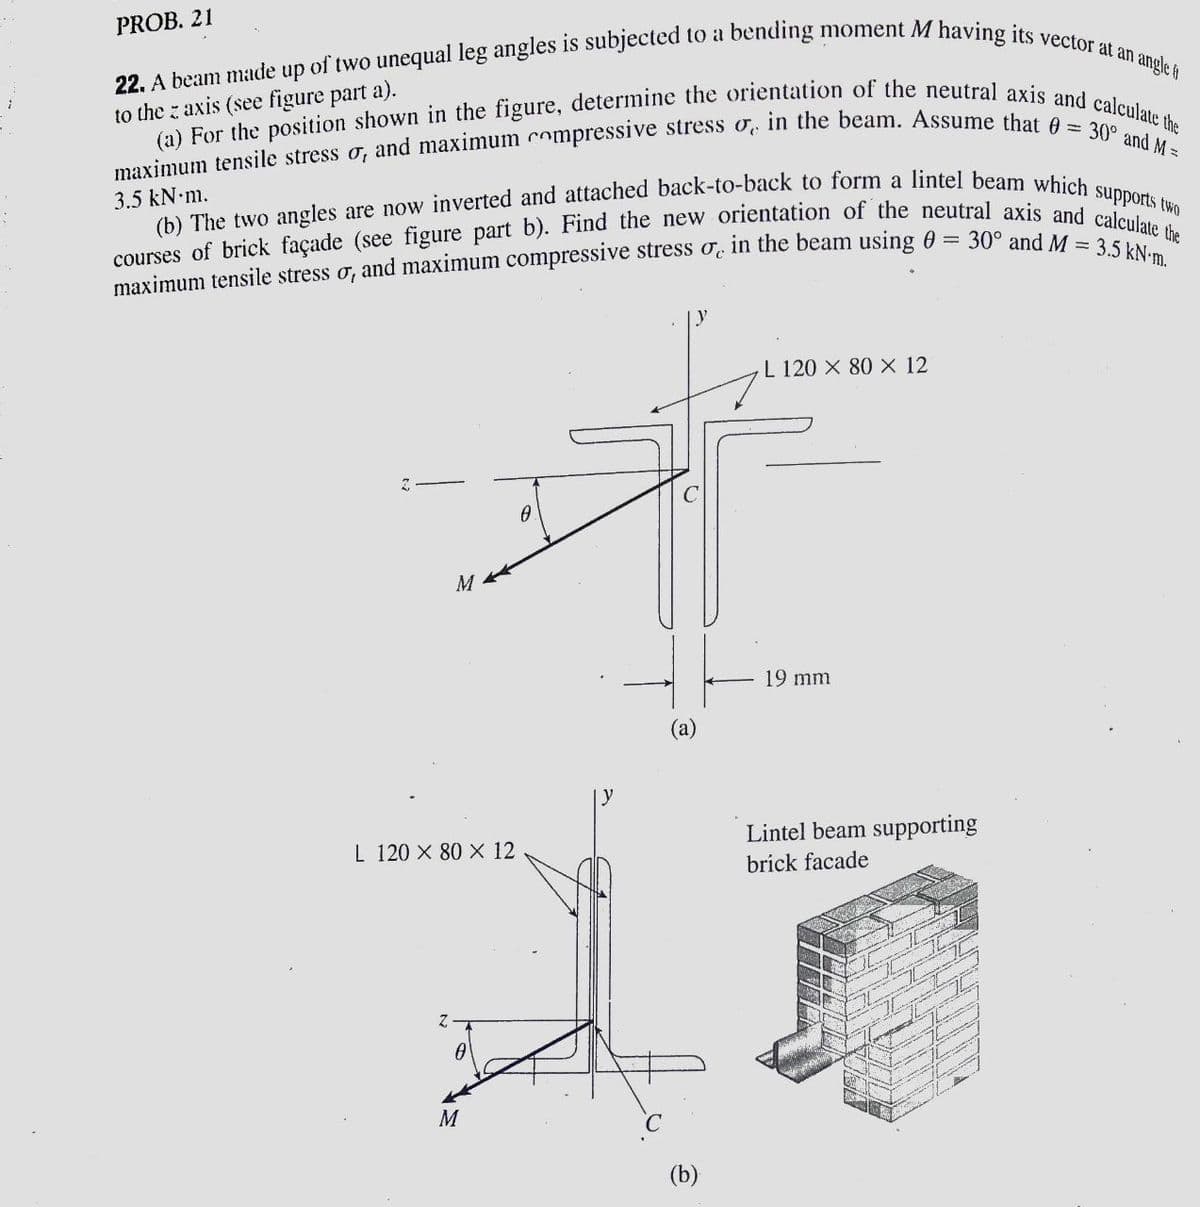 22. A beam made up of two unequal leg angles is subjected to a bending moment M having its vector at an angle 6
(b) The two angles are now inverted and attached back-to-back to form a lintel beam which supports two
(a) For the position shown in the figure, determine the orientation of the neutral axis and calculate the
PROB. 21
to the z axis (see figure part a).
3.5 kN m.
30° and M = 3.5 kN-m.
maximum tensile stress o, and maximum compressive stress o, in the beam using 0 =
L 120 X 80 X 12
M
19 mm
(а)
L 120 X 80 X 12
Lintel beam supporting
brick facade
M
(b)
